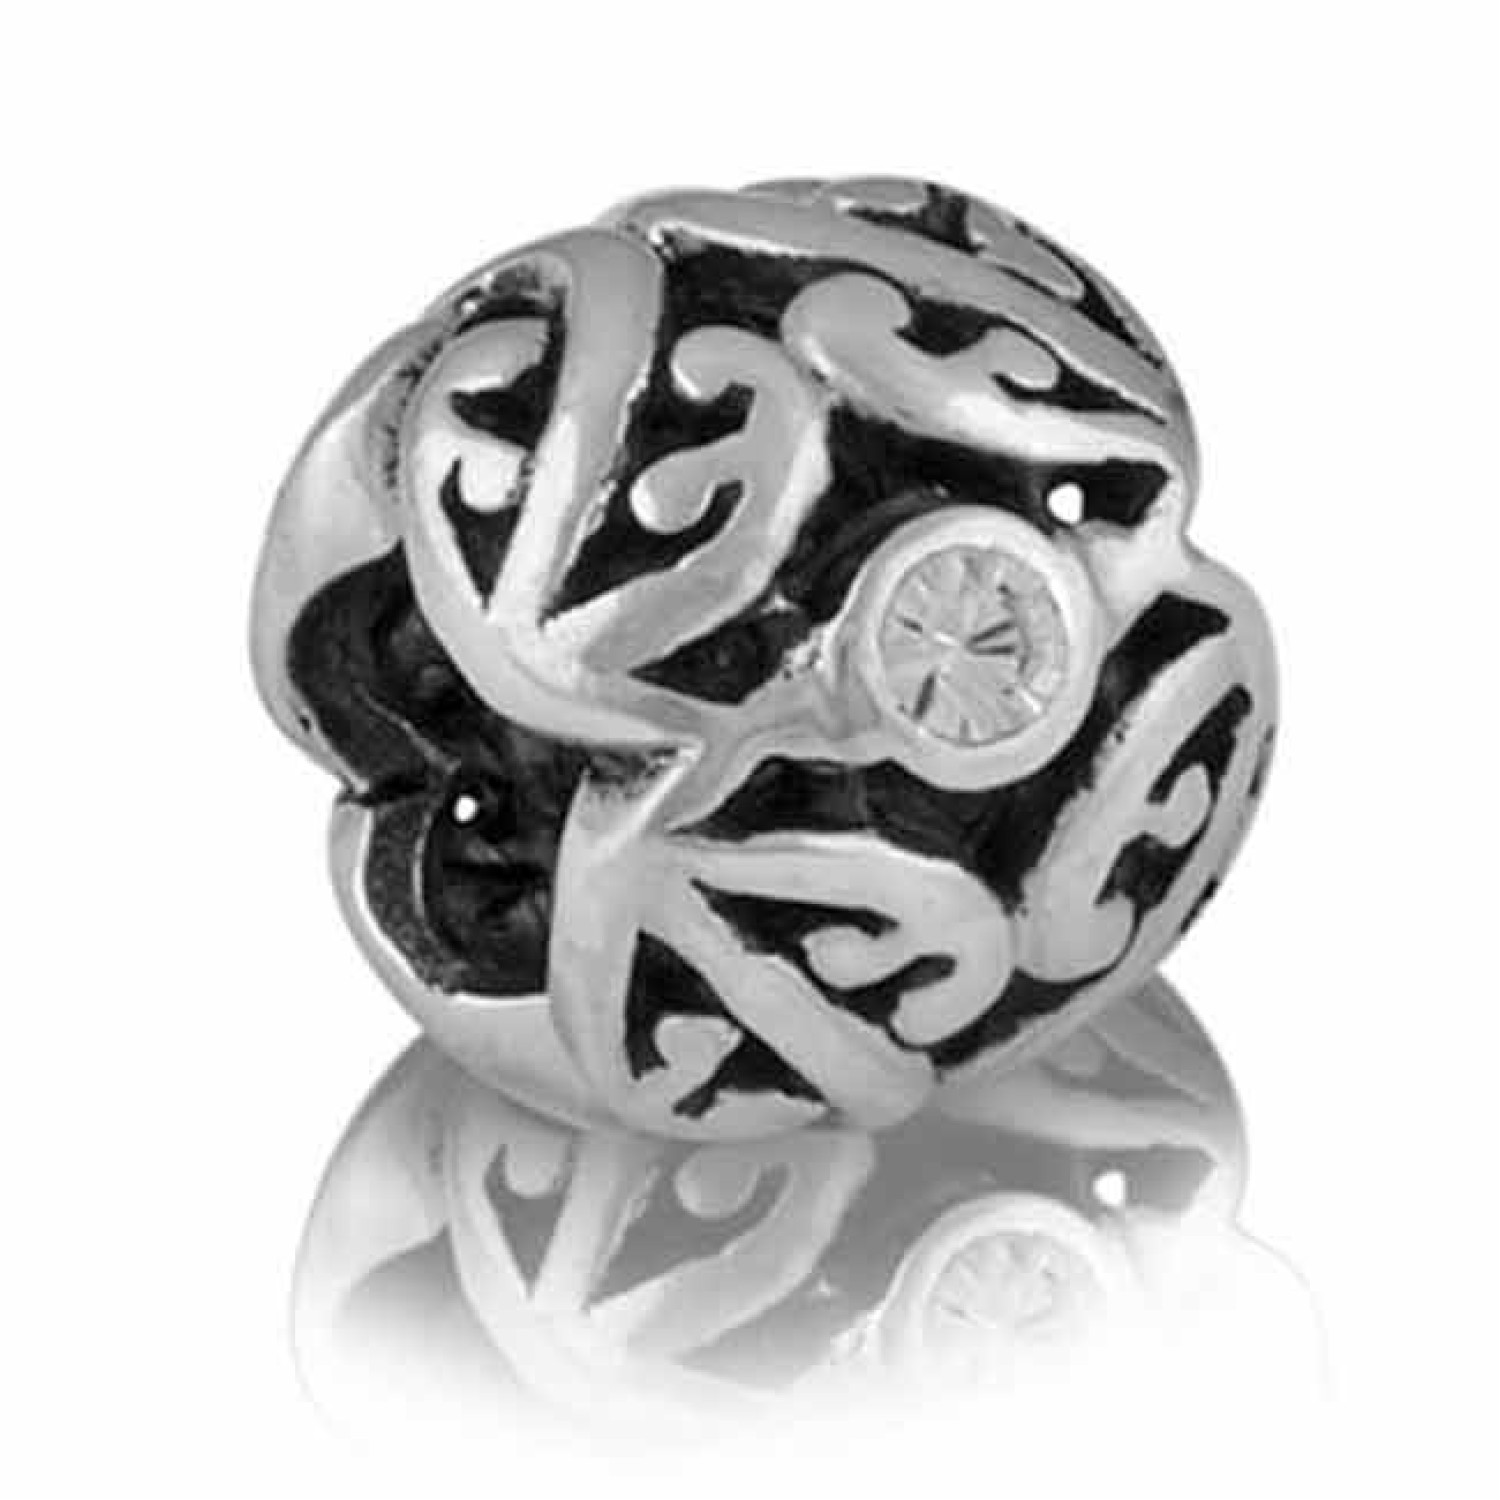 LK136 Evolve Charms CZ Family Tree. Evolve New Zealand LK136 Evolve Charms CZ Family Tree Our beautiful Family Tree charm is inspired by the iconic Maori Kowhaiwhai patterns, which often adorn the rafters of whare (Maori meeting houses) in honour of celeb